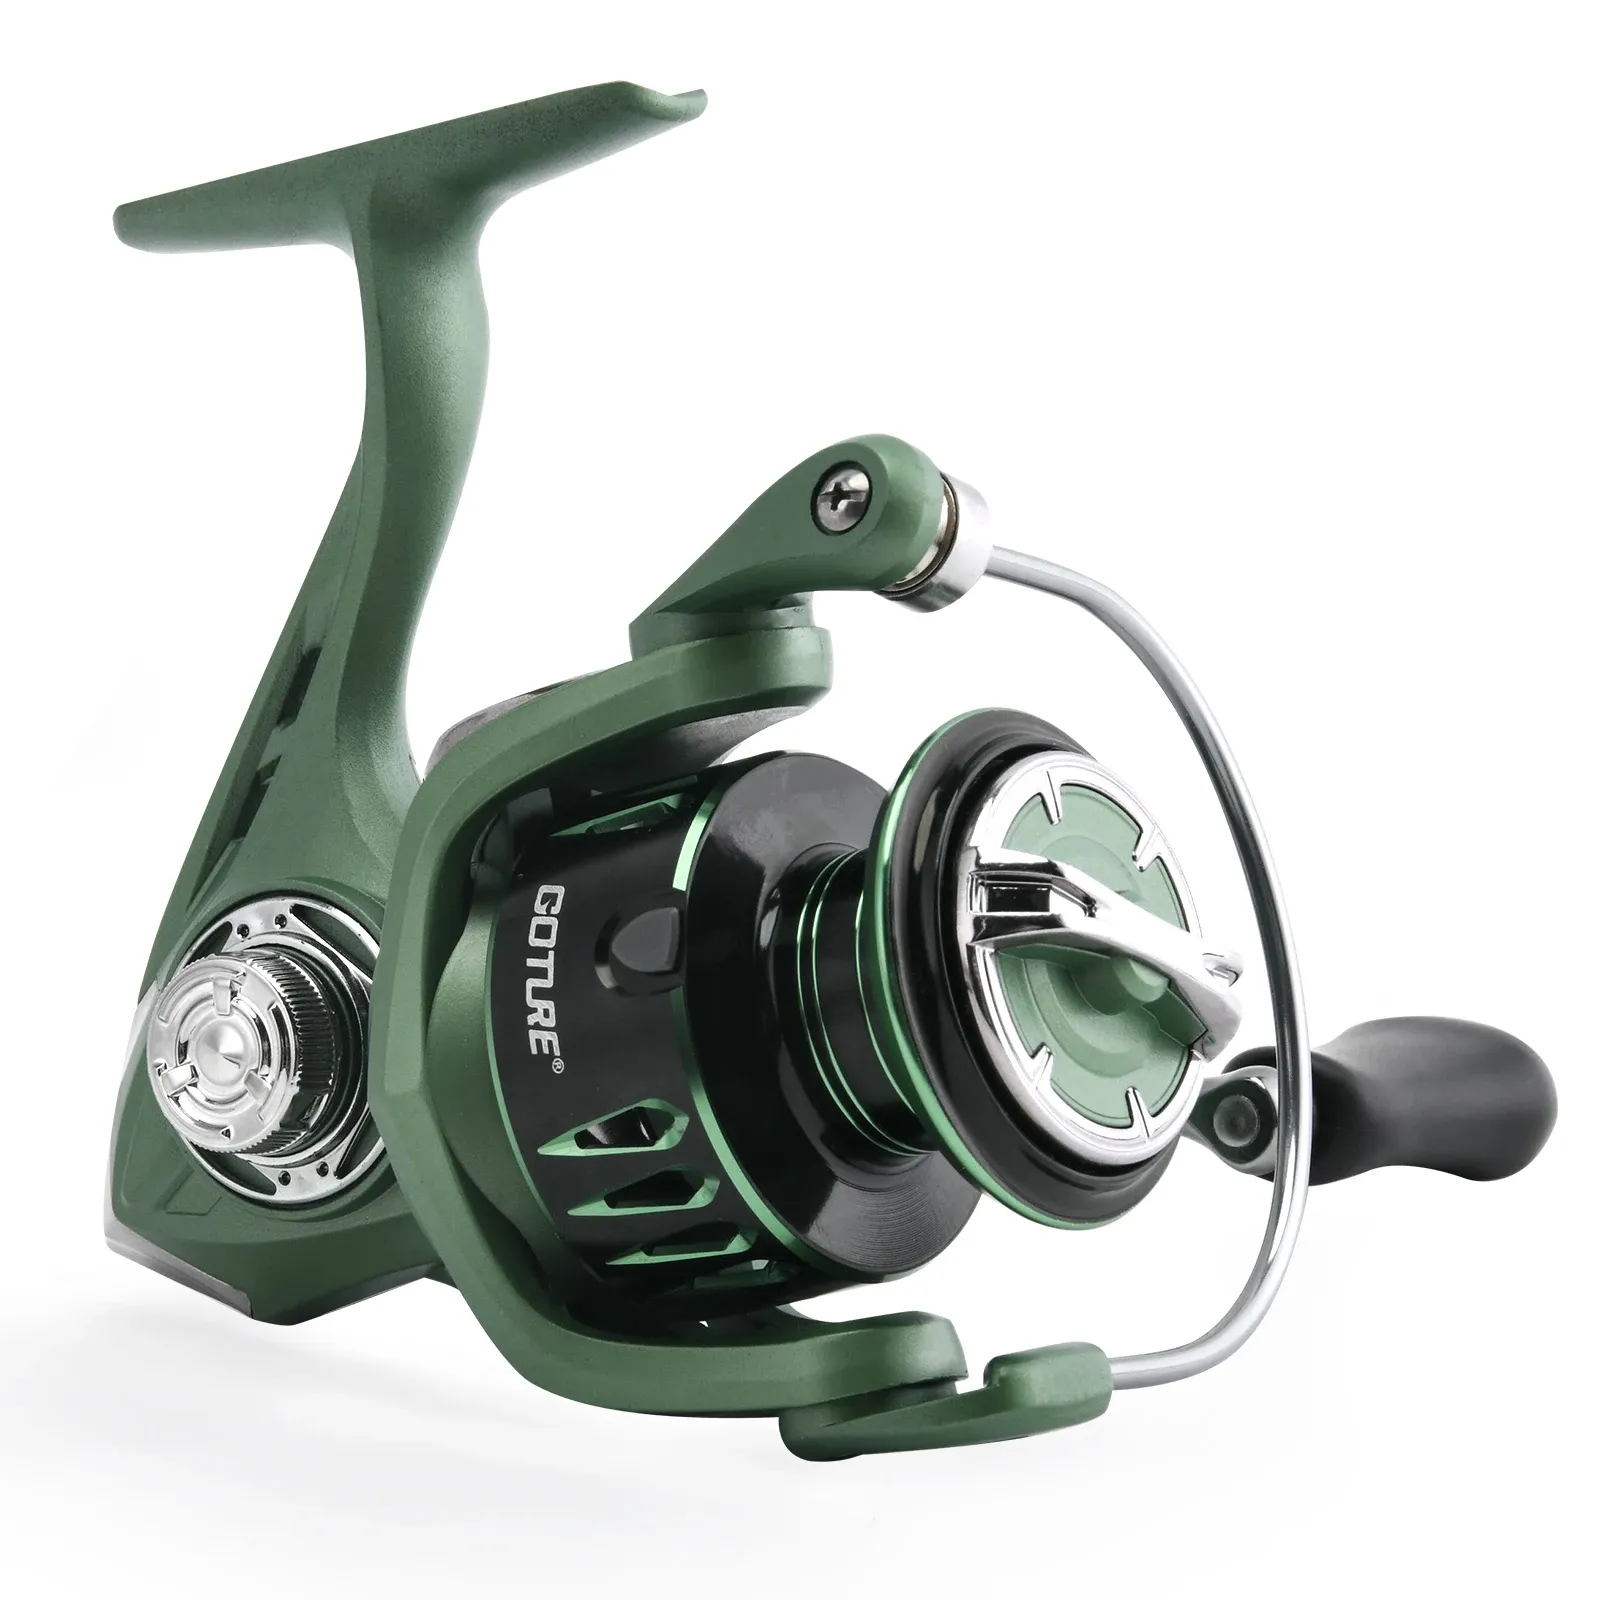 Reels Goture High Speed Carp Fishing Reel 1000 6000 Series 5.2:1 Gear Ratio Surfcasting Spinning Reel Fishing Tackle